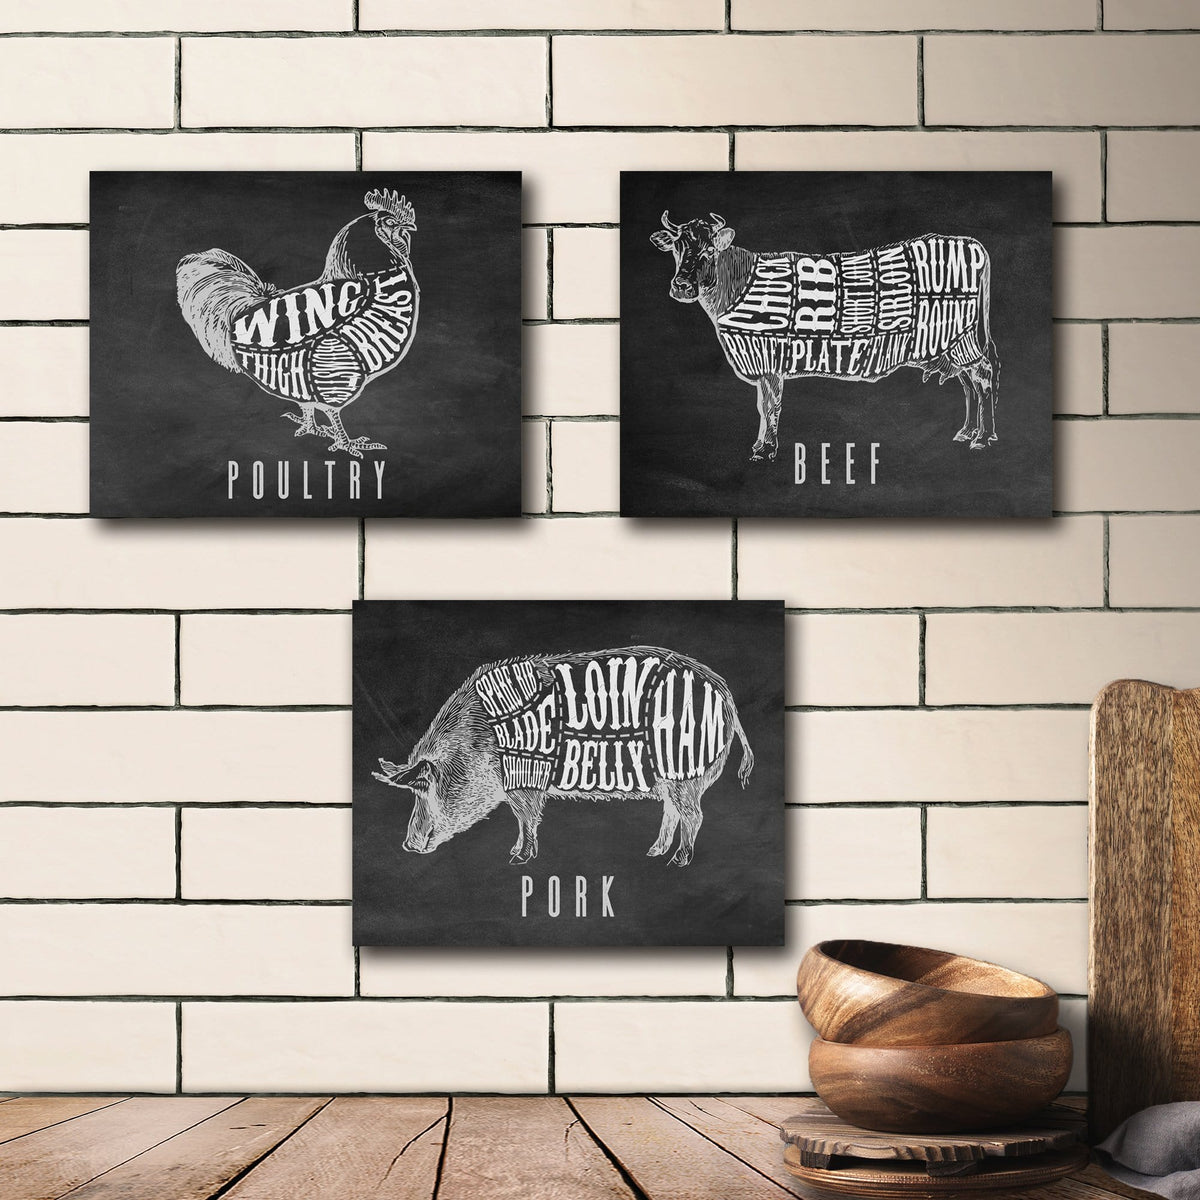 Set of three butcher cut prints include Beef, Pork and Poultry.